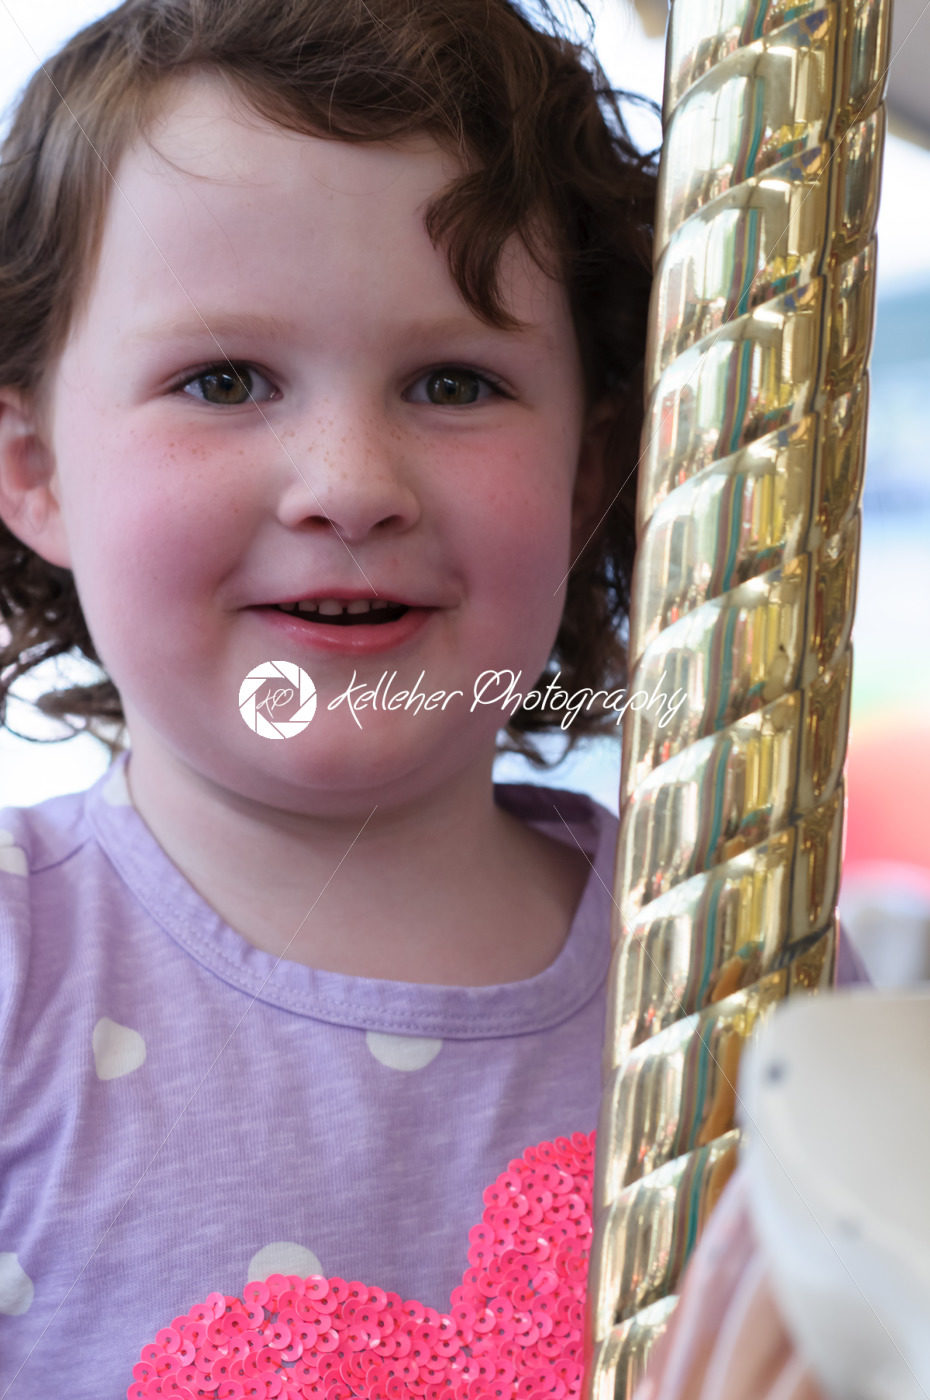 Young girl riding on fairground horse on carousel amusement ride at fairgrounds park outdoor - Kelleher Photography Store